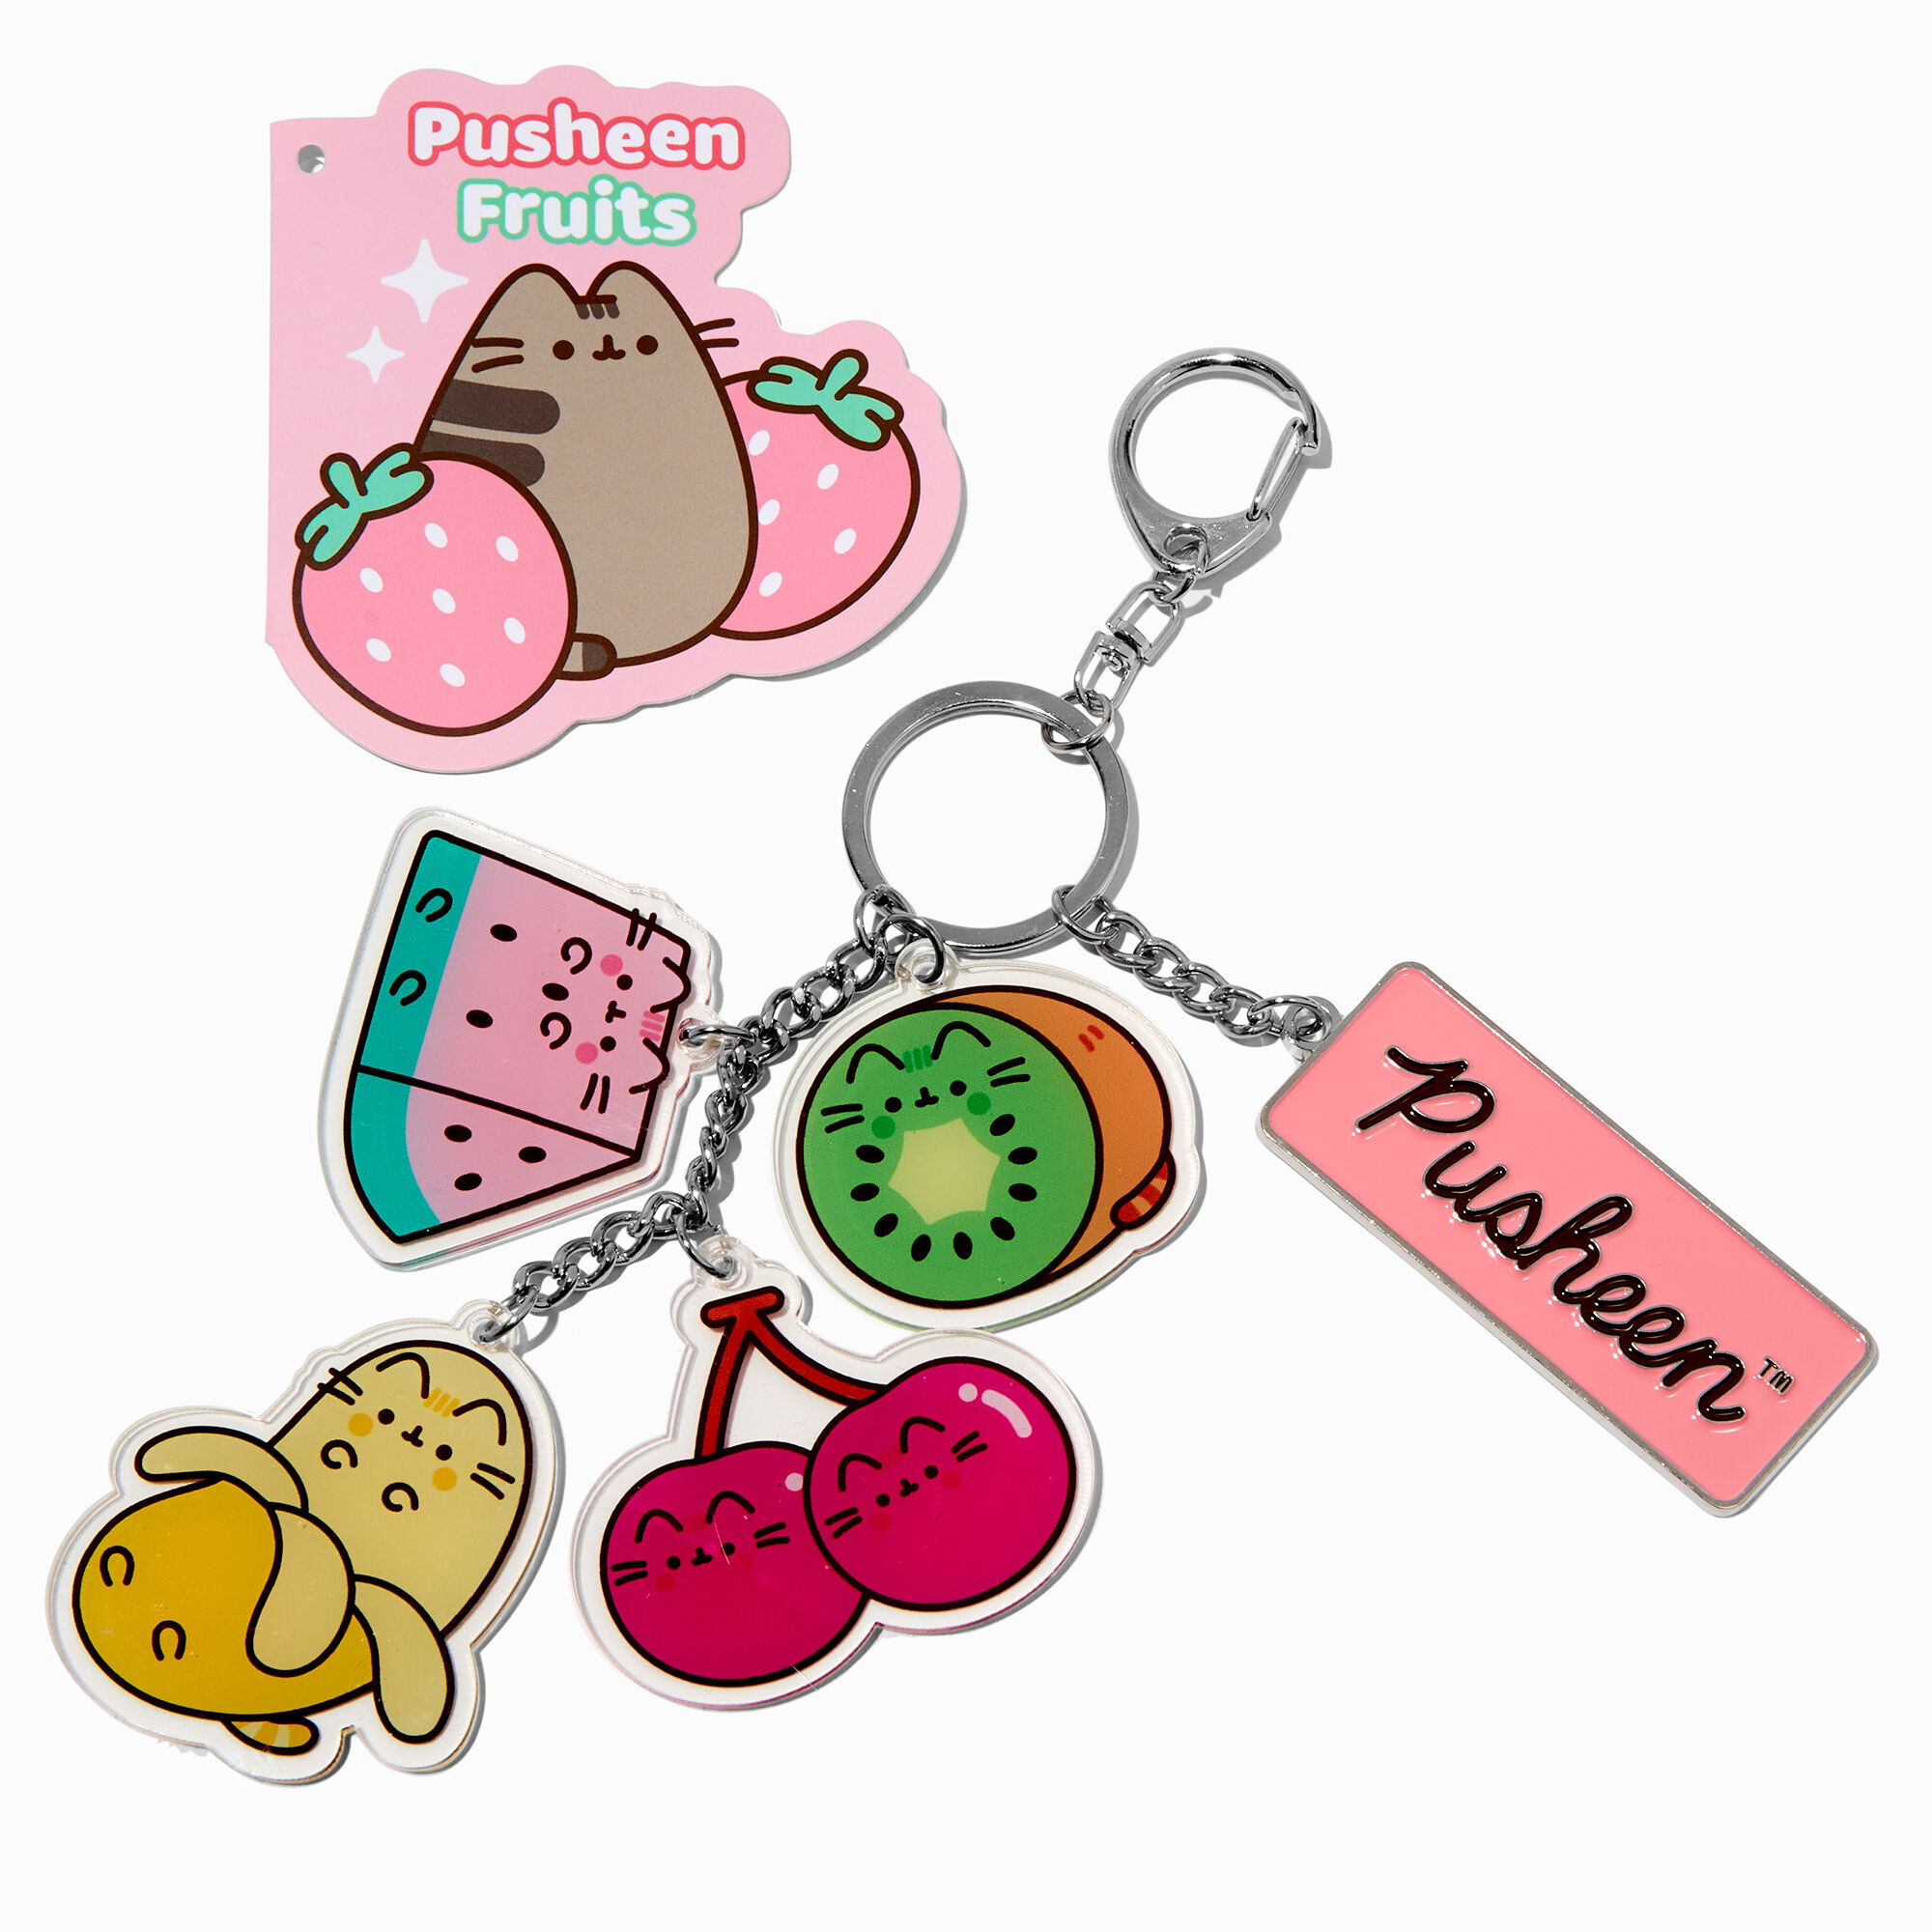 View Claires Pusheen Fruits Charm Keyring information